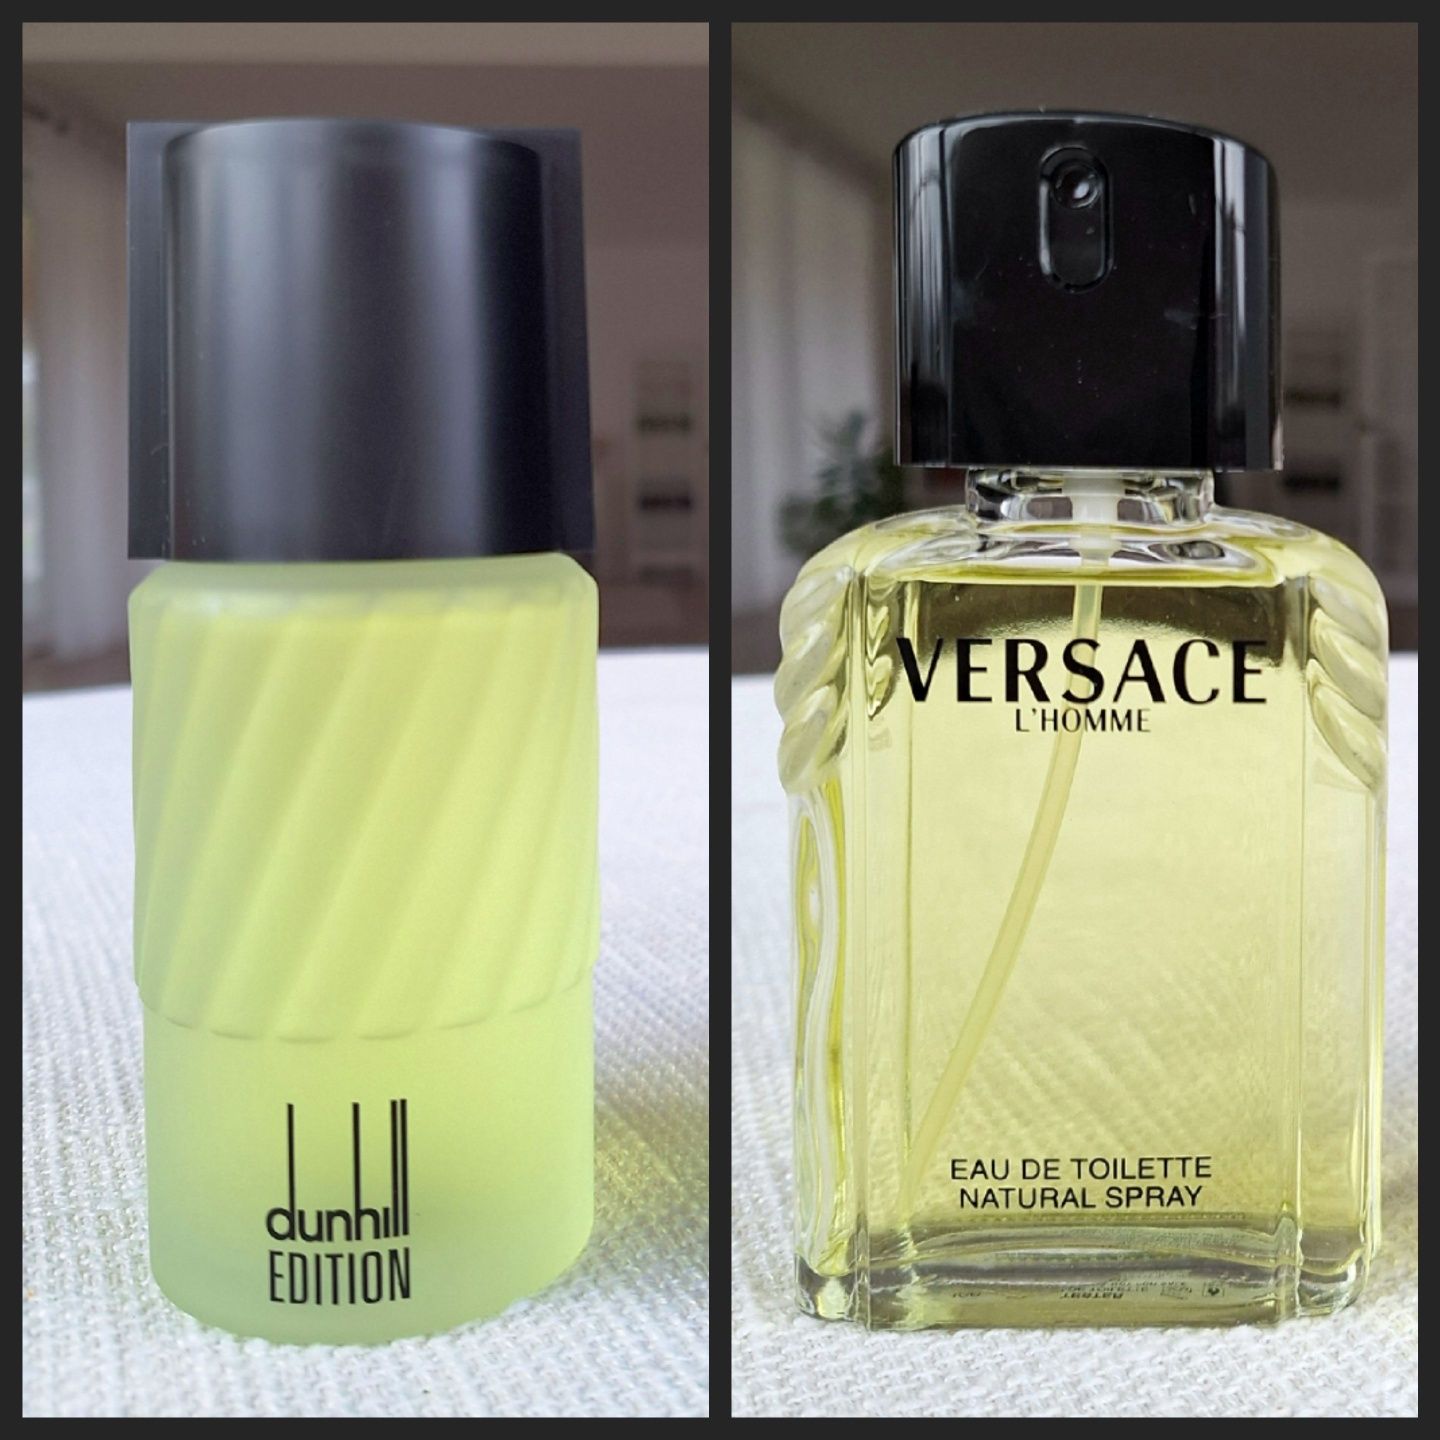 Versace L'Homme EdT 100ml / Dunhill Edition EdT 100ml